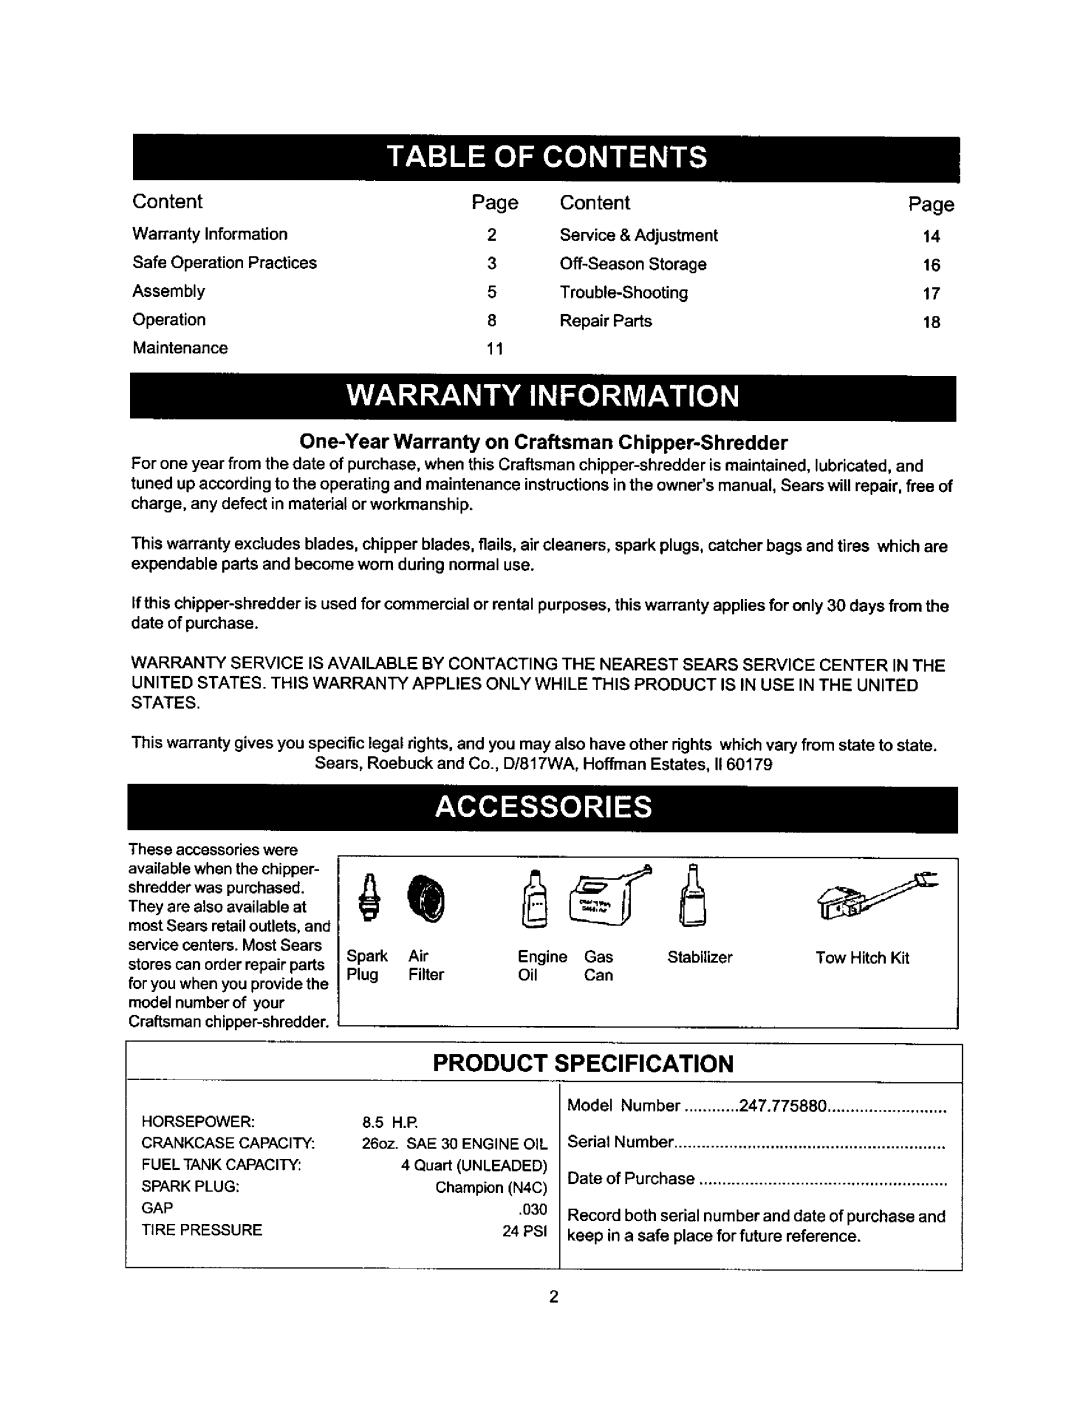 Craftsman 247.77588O owner manual Product Specification, One-Year Warranty on Craftsman Chipper-Shredder 